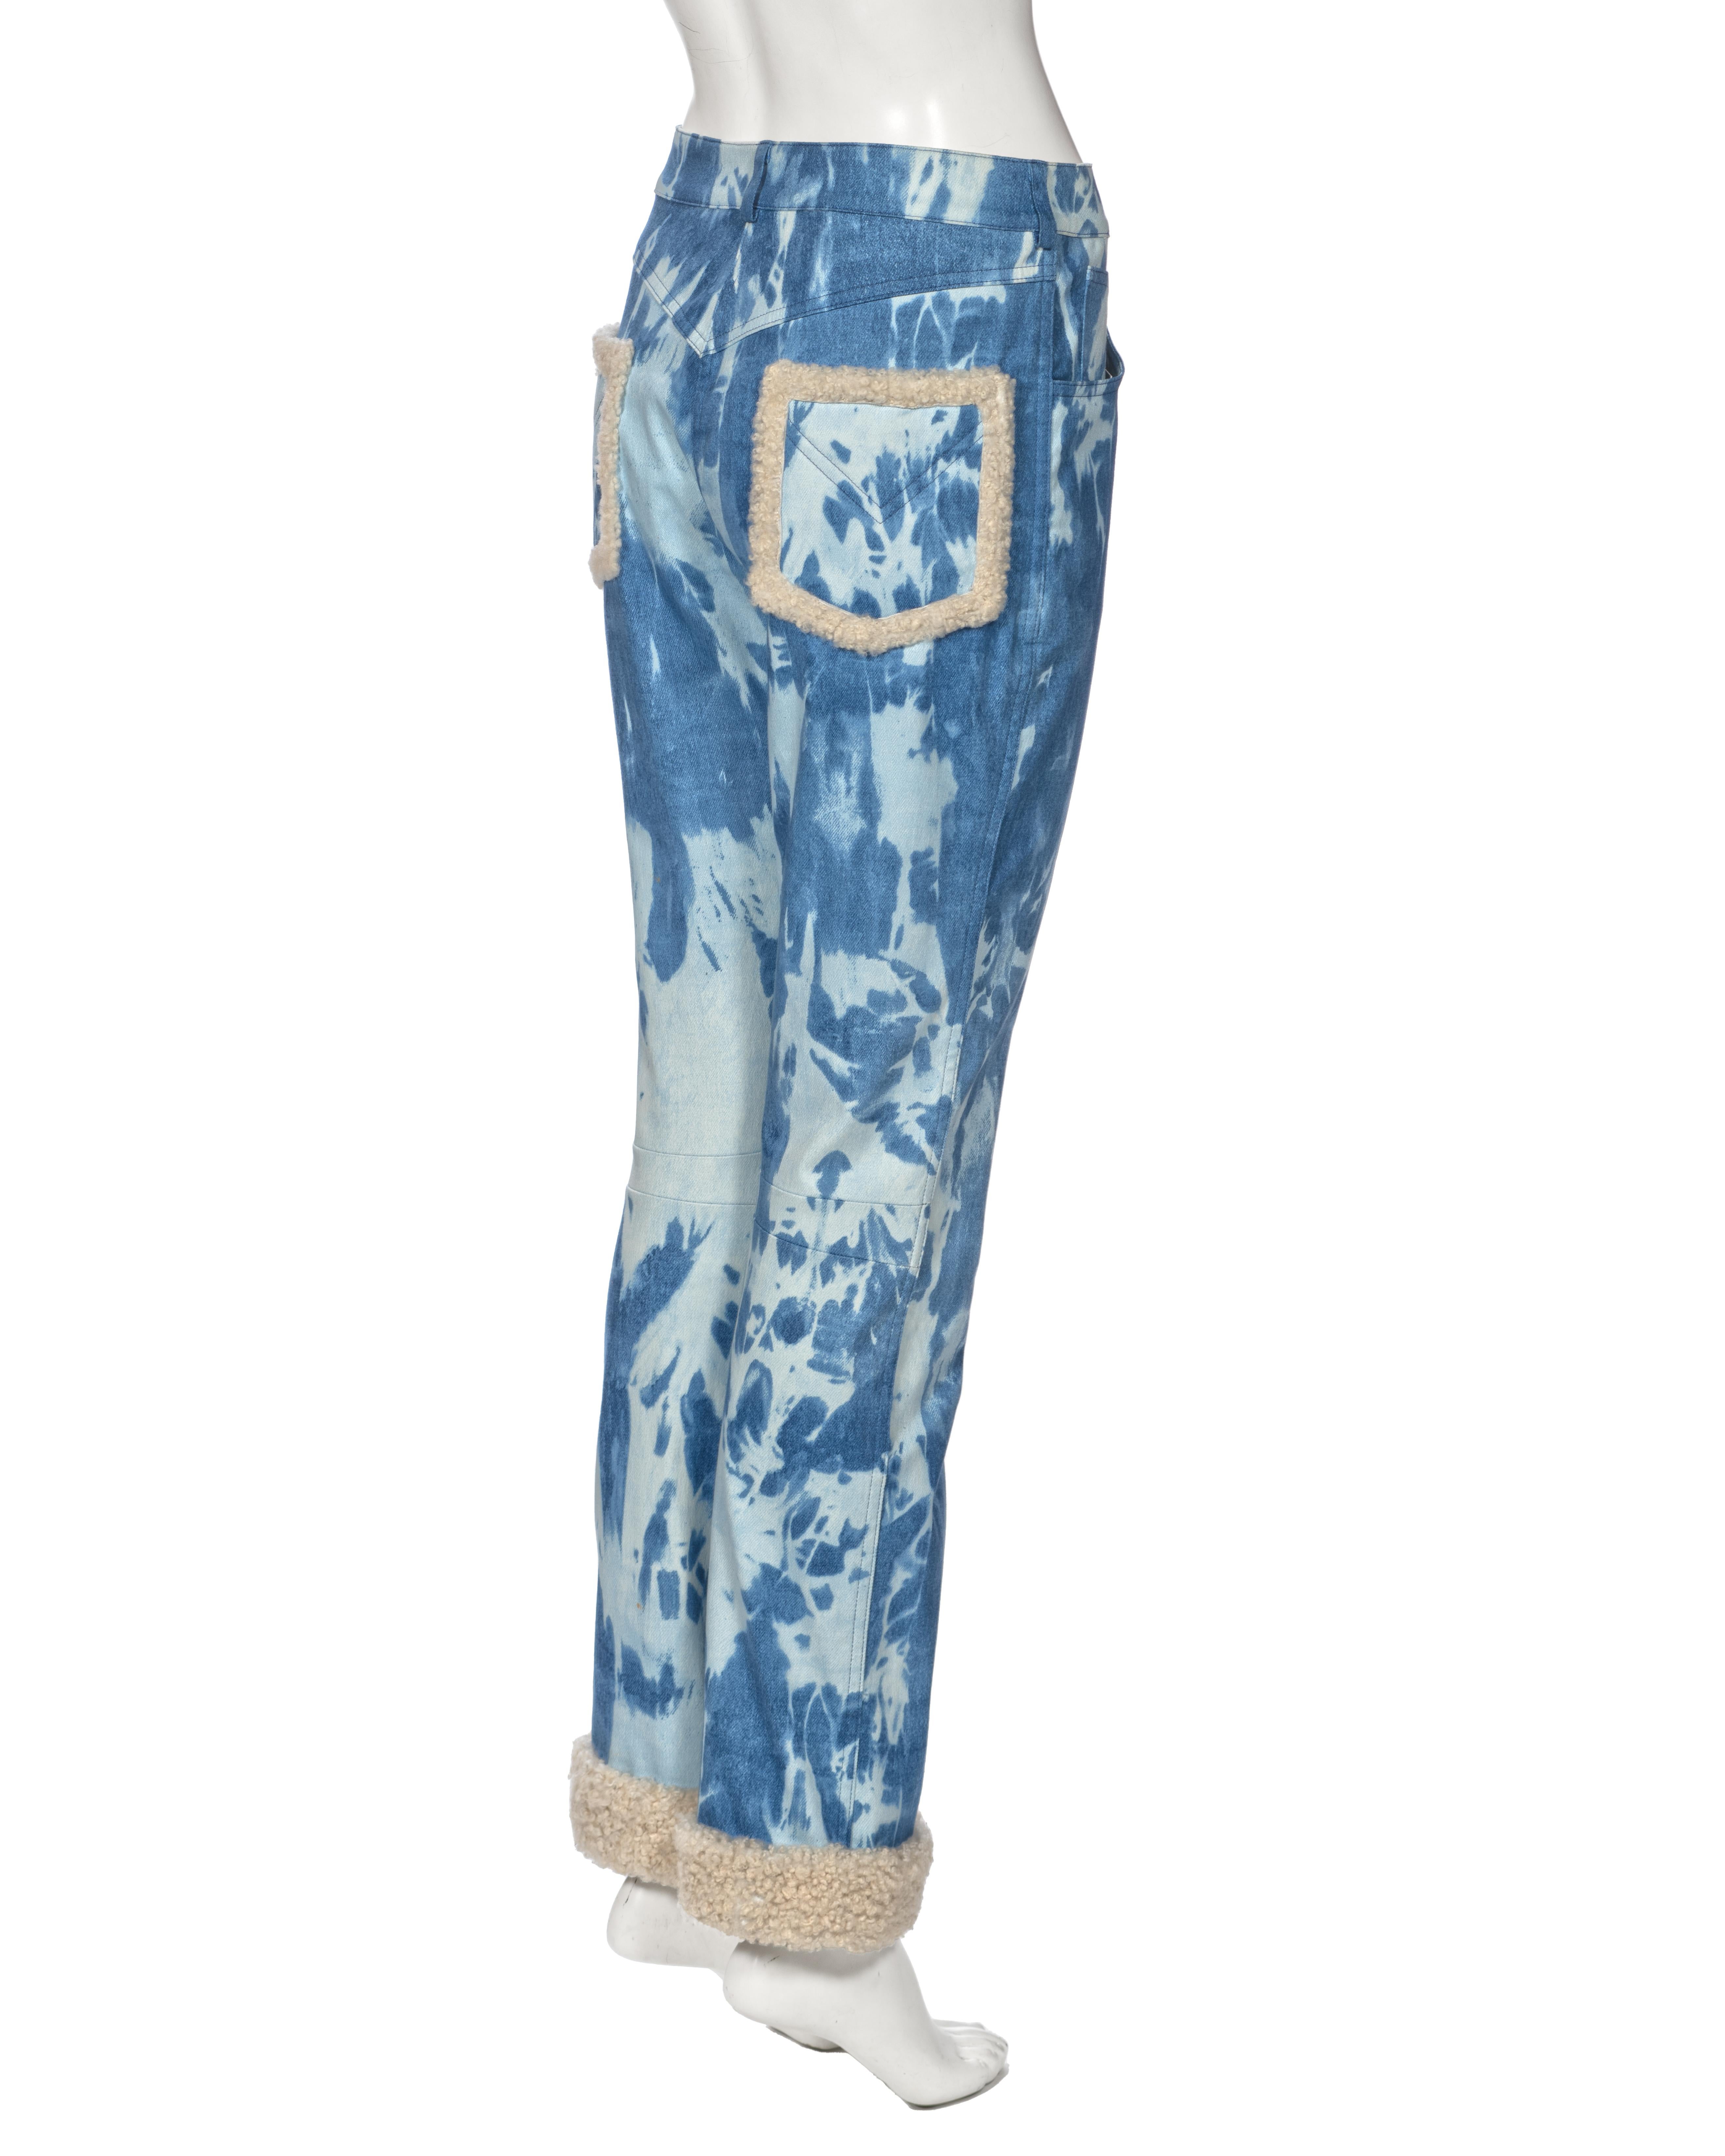 Christian Dior by John Galliano Bleached-Denim and Shearling Pants, fw 2000 For Sale 4